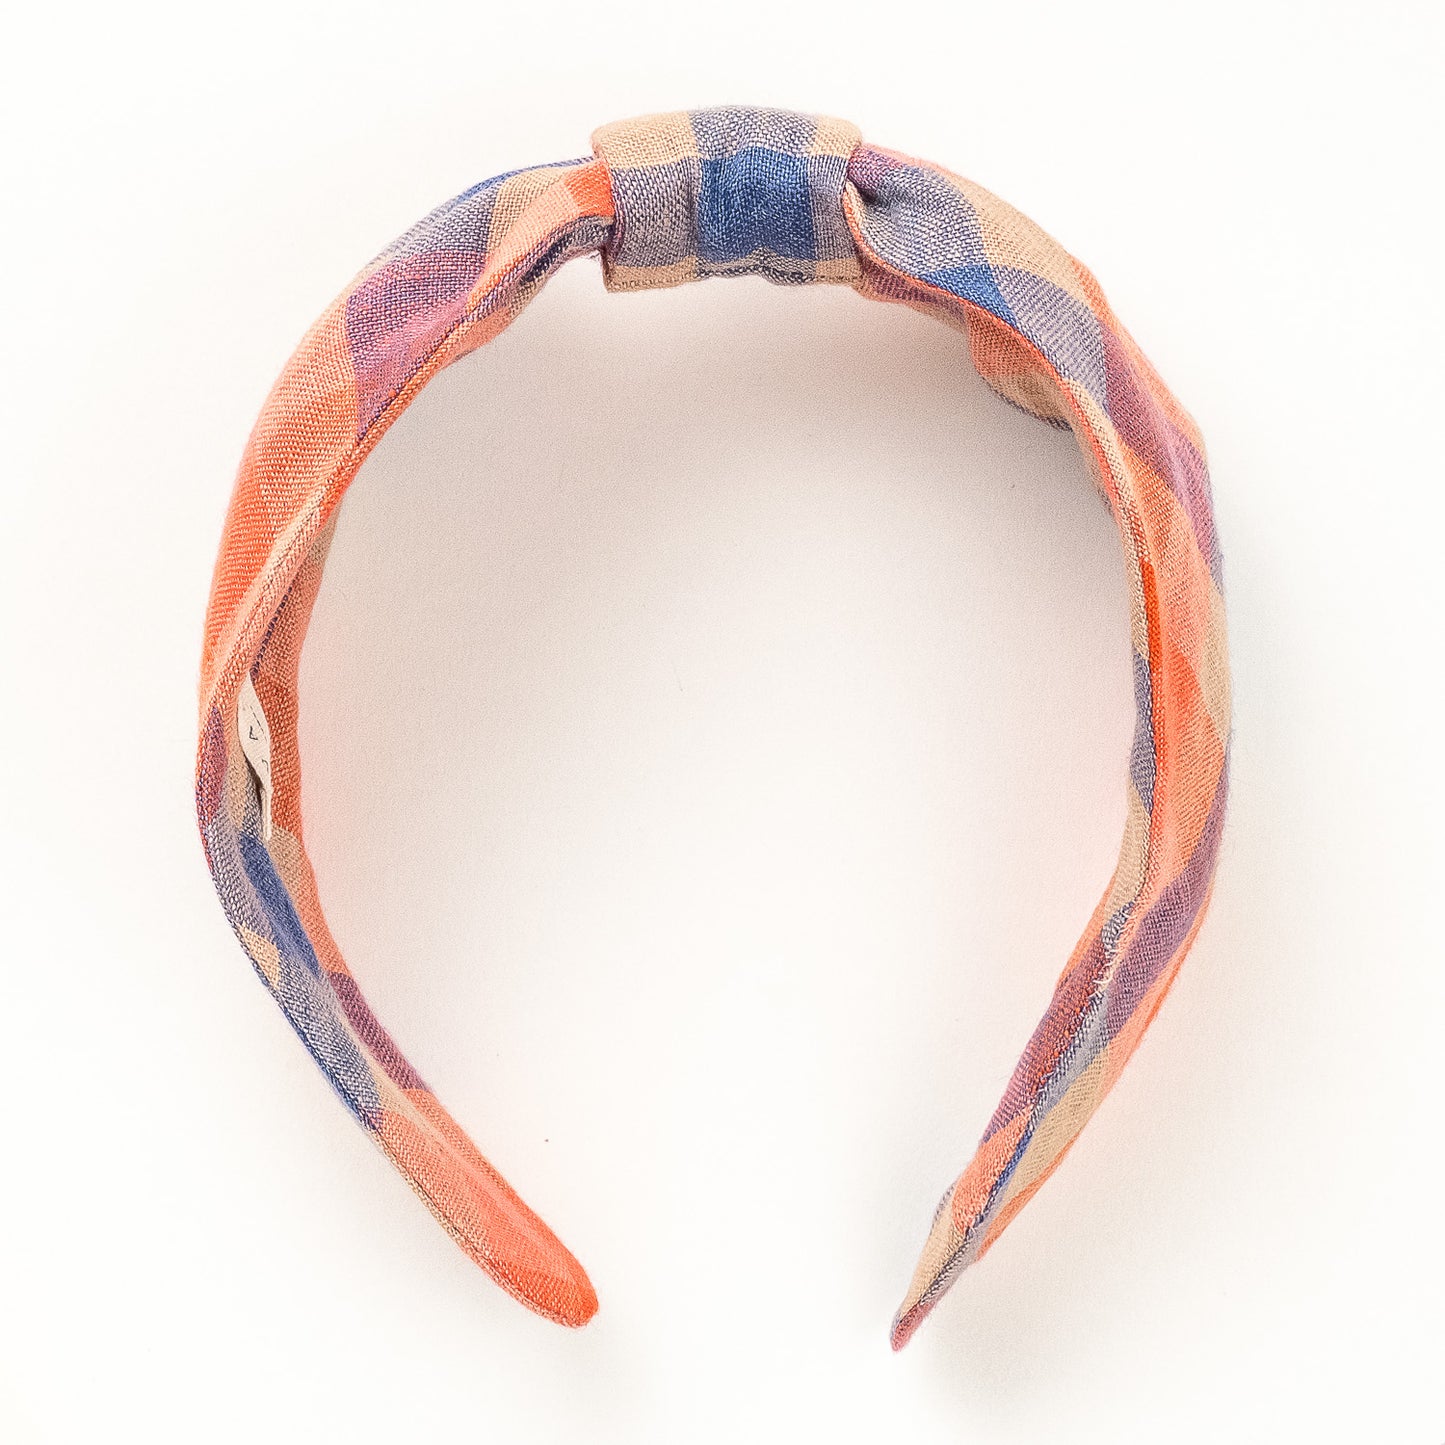 Ines Hairband - Blue and Pillar Box Red